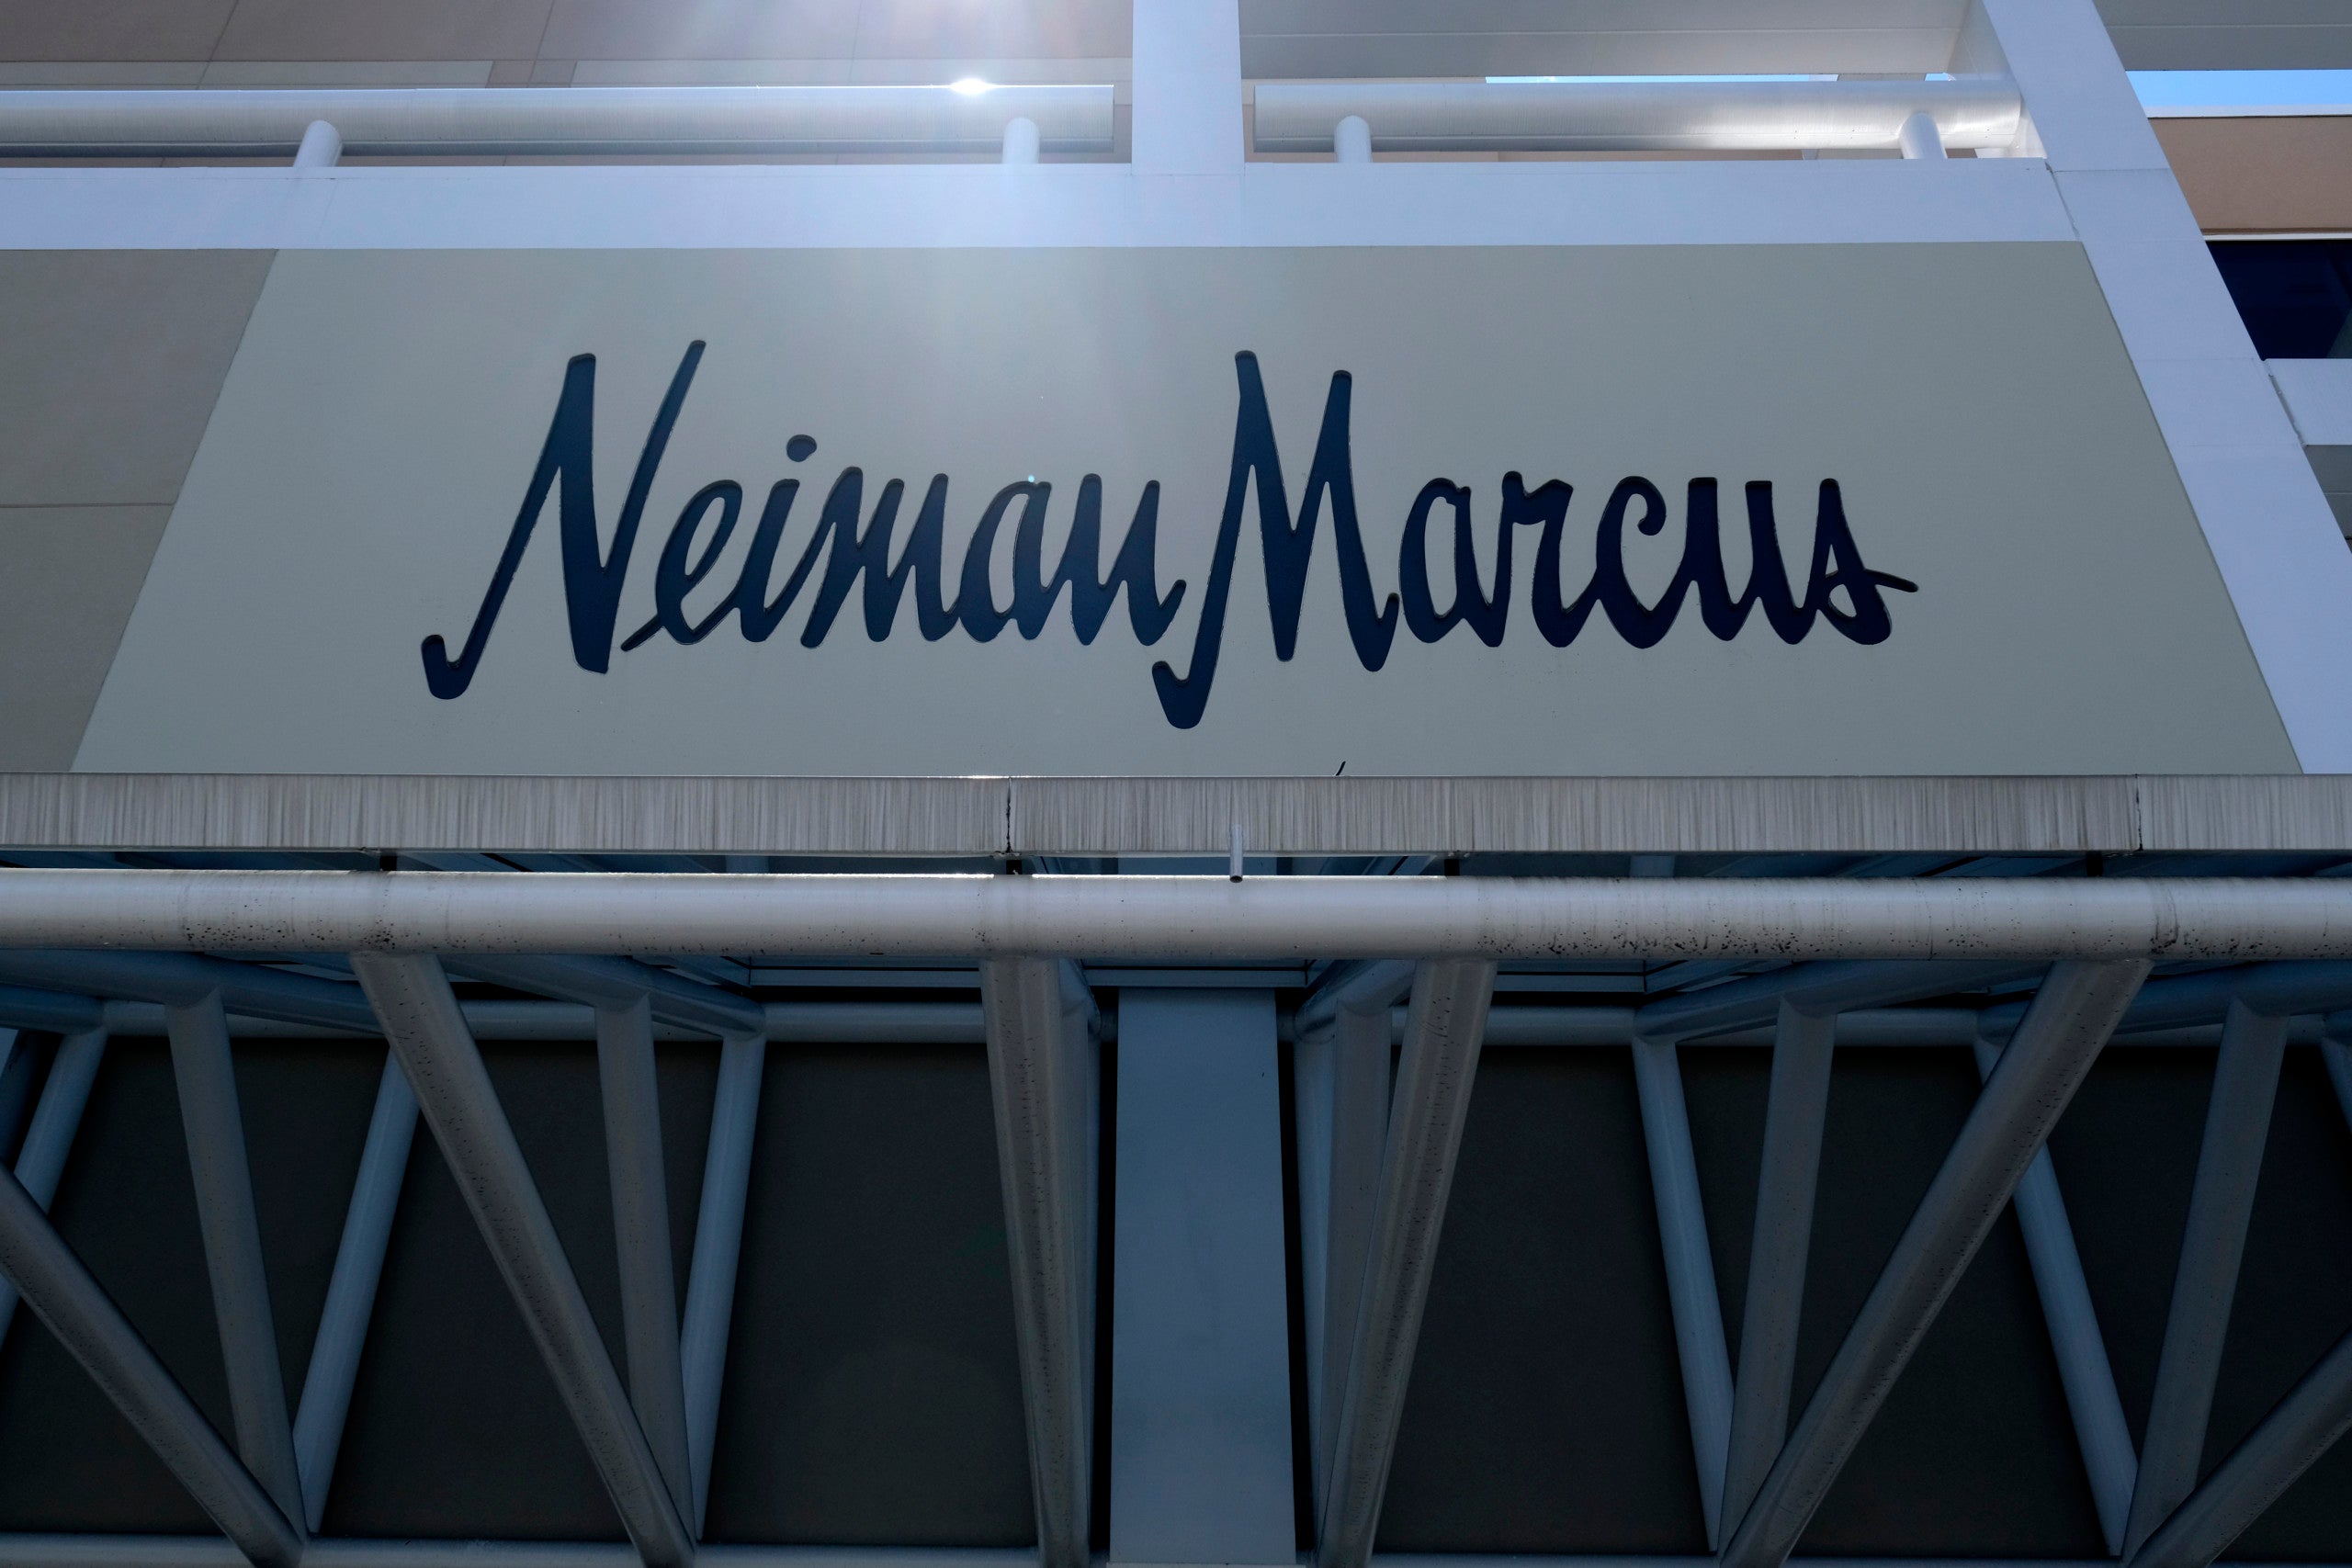 Neiman Marcus Re-Introduces Itself Post-Bankruptcy With Evocative Campaign